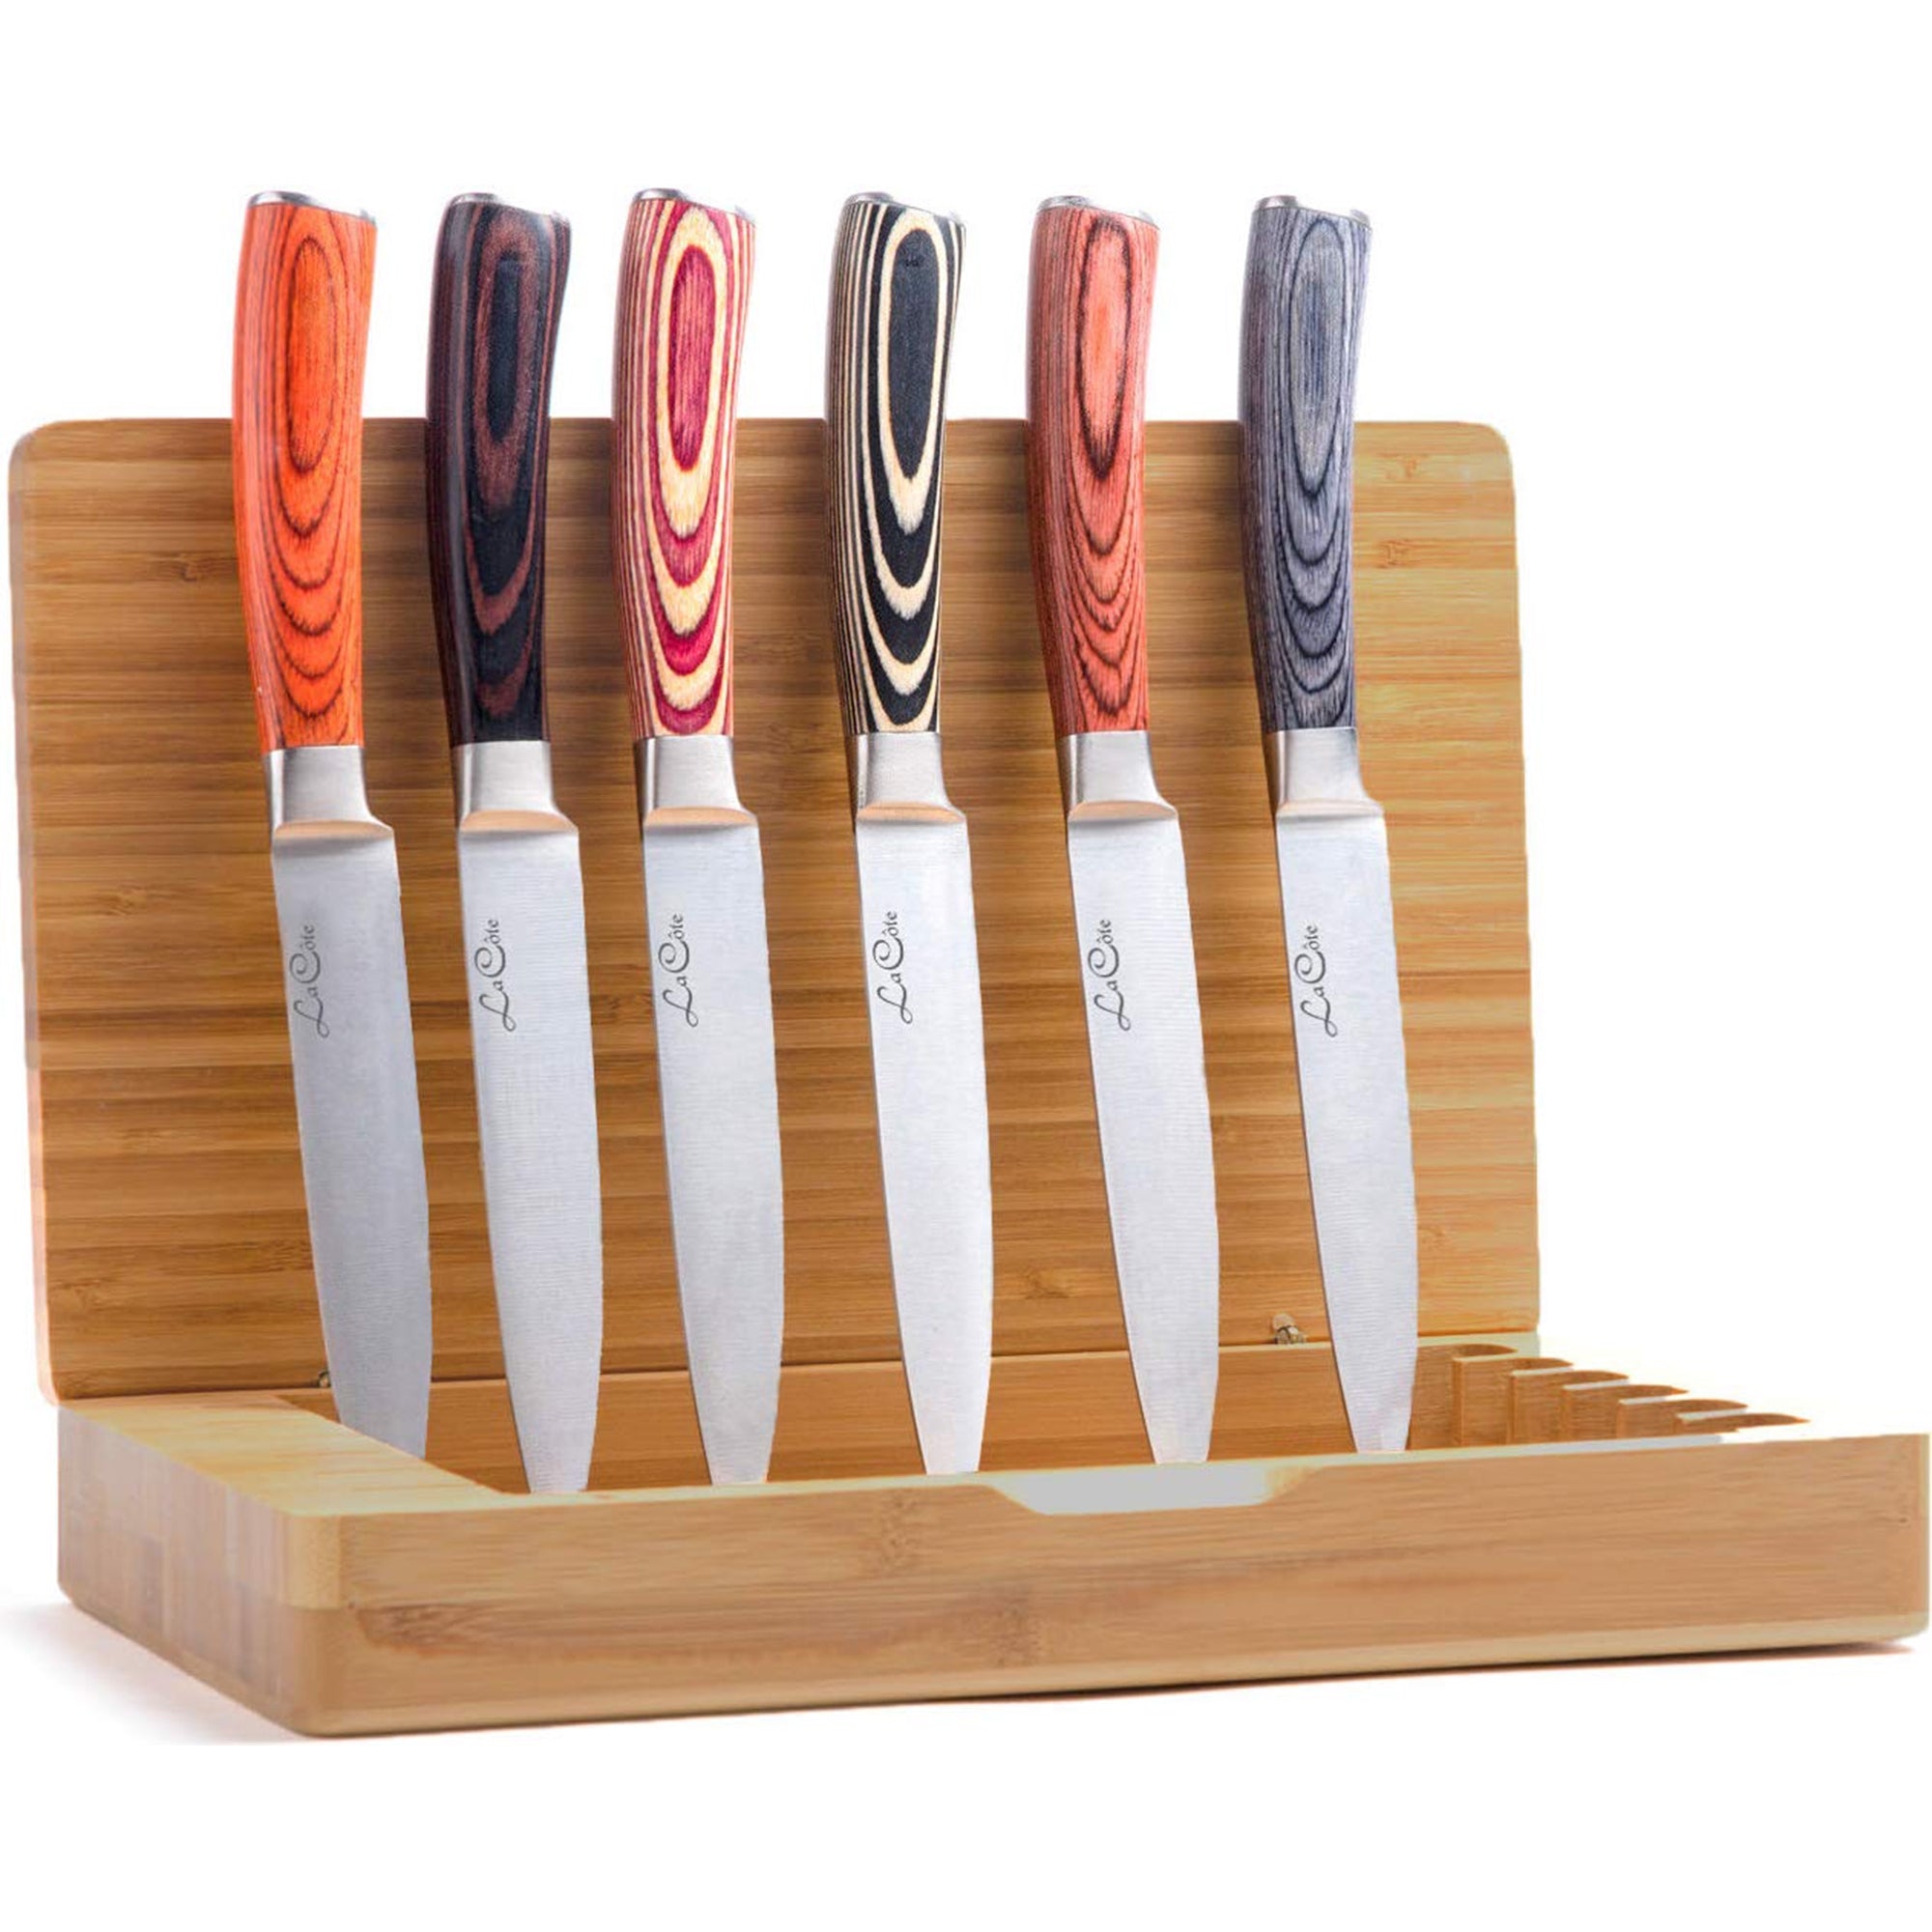 La Cote 6 Piece Steak Knives Set Japanese Stainless Steel Wood Handle In Bamboo Storage Box (6 PC Steak Knife Set - Multi) (Straight Edge blades in Bamboo Box)